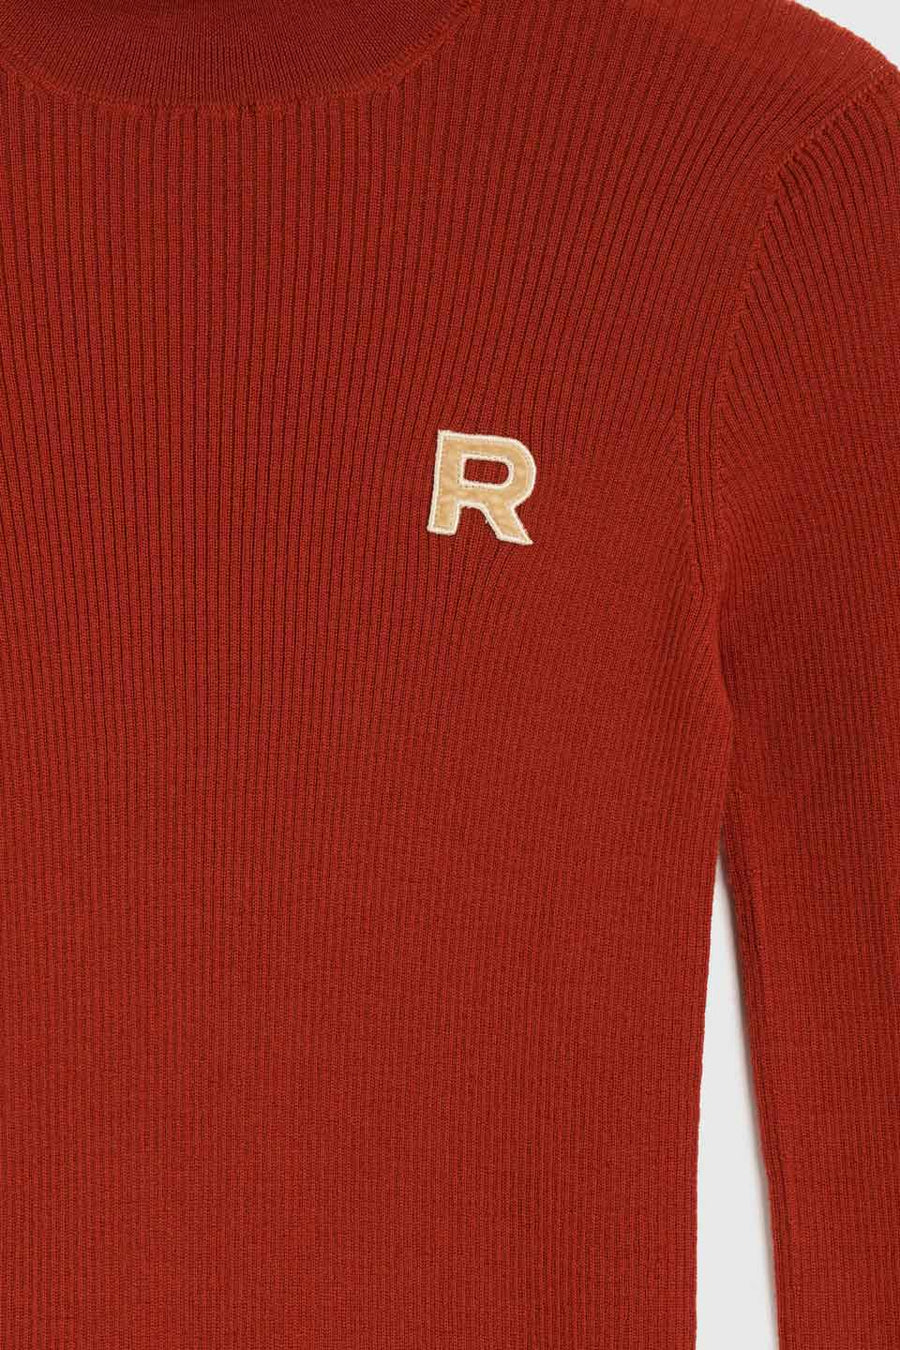 rochas t neck sweater red detail